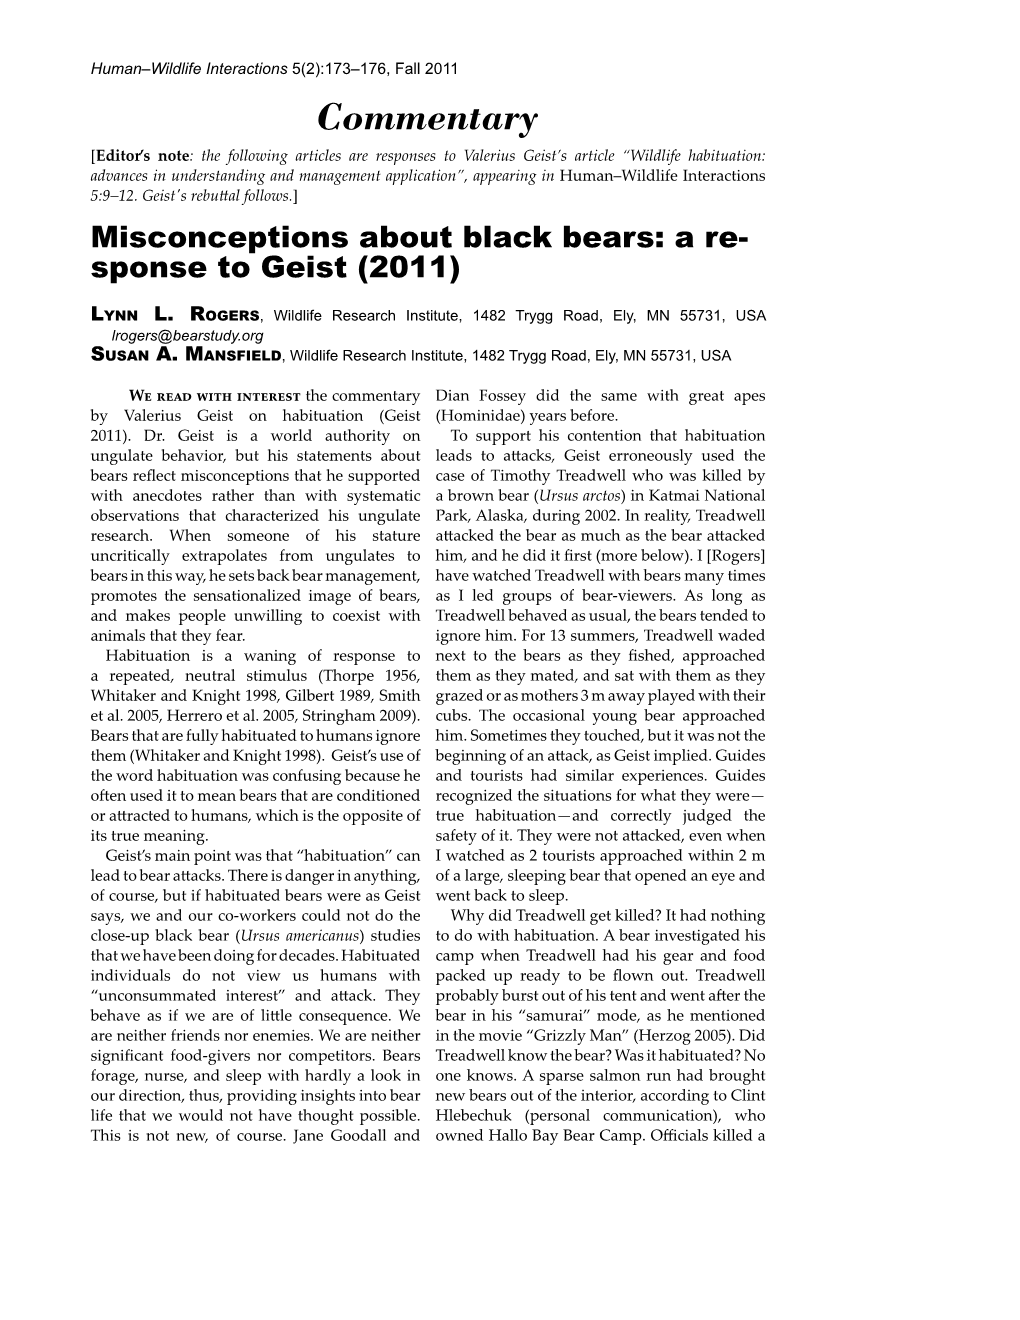 Misconceptions About Black Bears: a Response to Geist (2011)